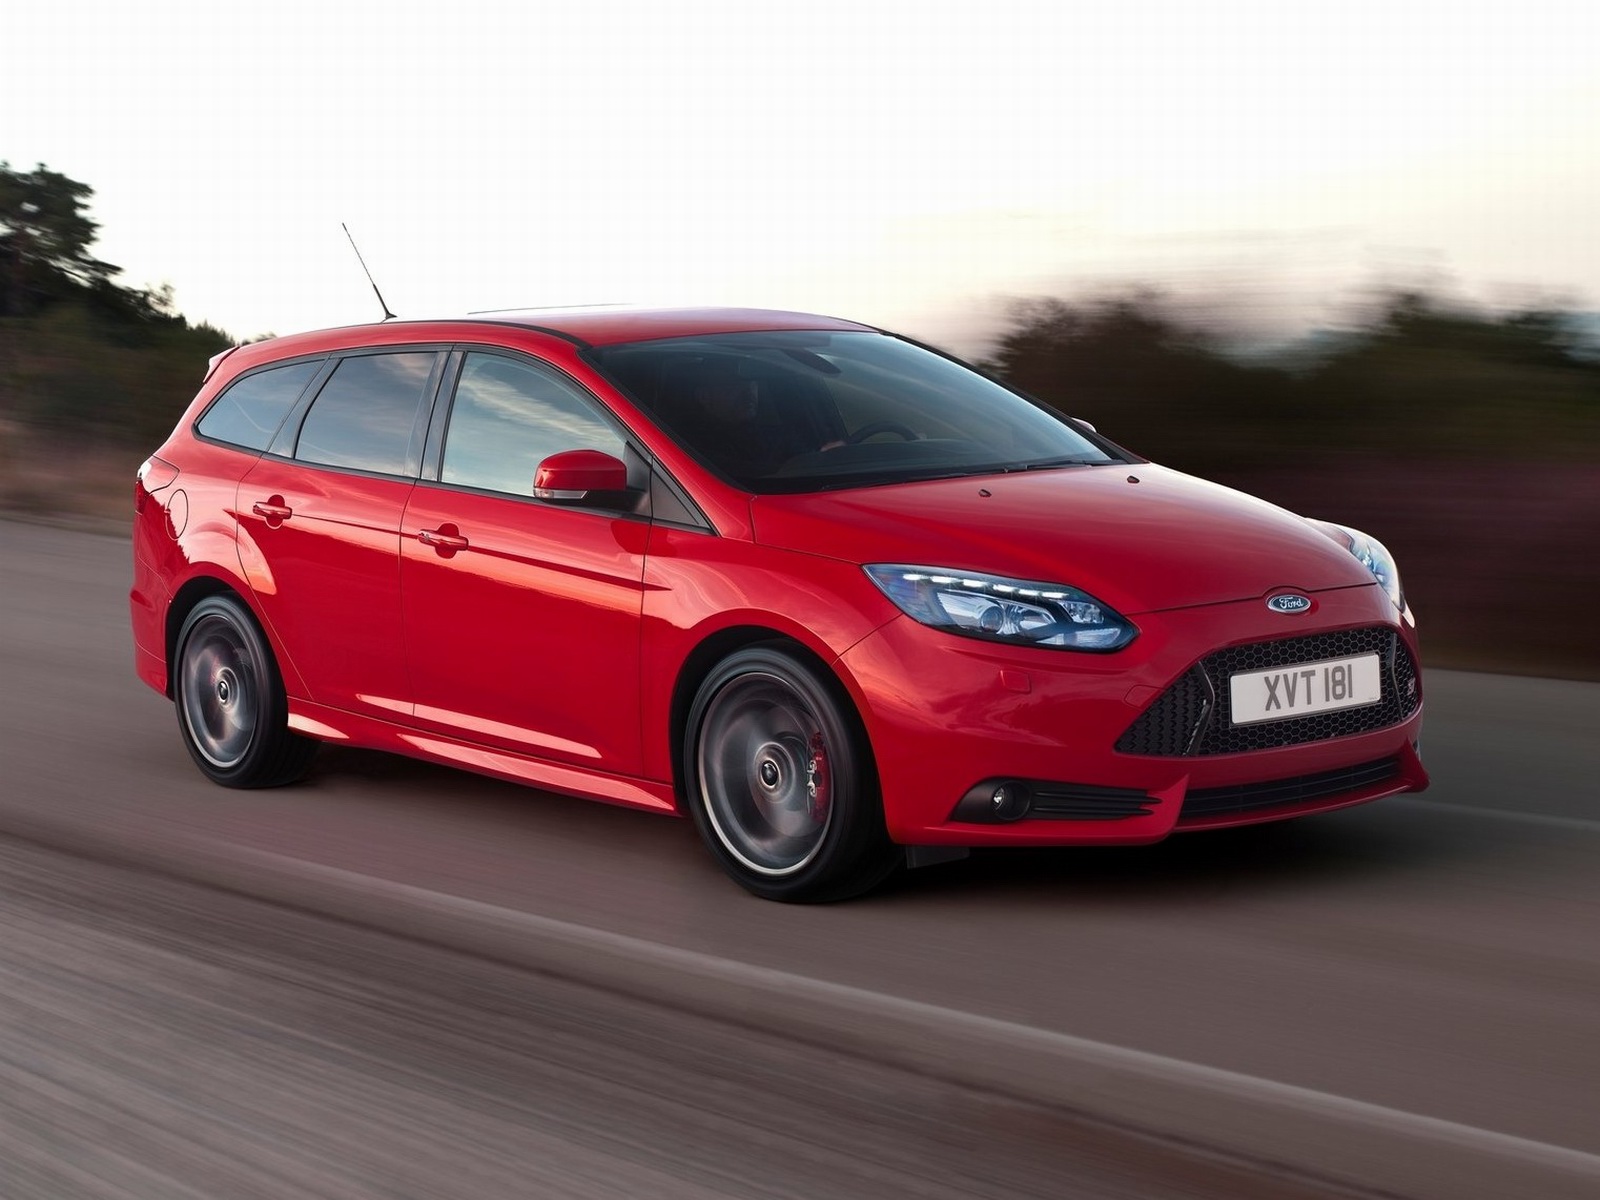 St Wallpaper Ford Focus Pictures